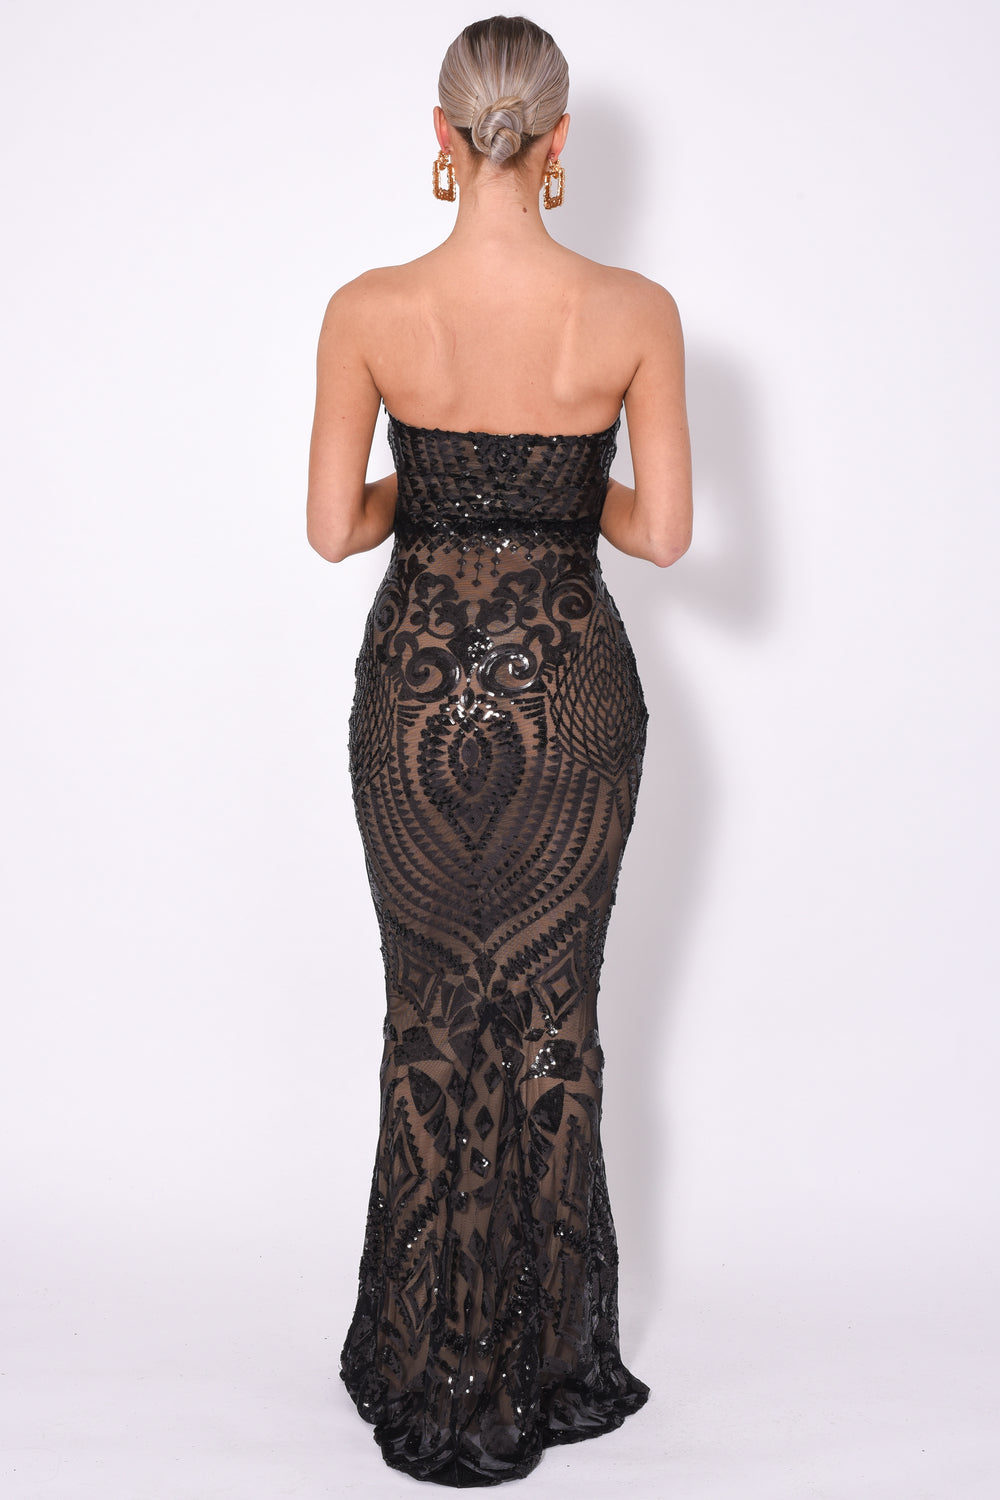 Kenza Black Luxe Sweetheart Plunge Sequin Embellished Fishtail Dress